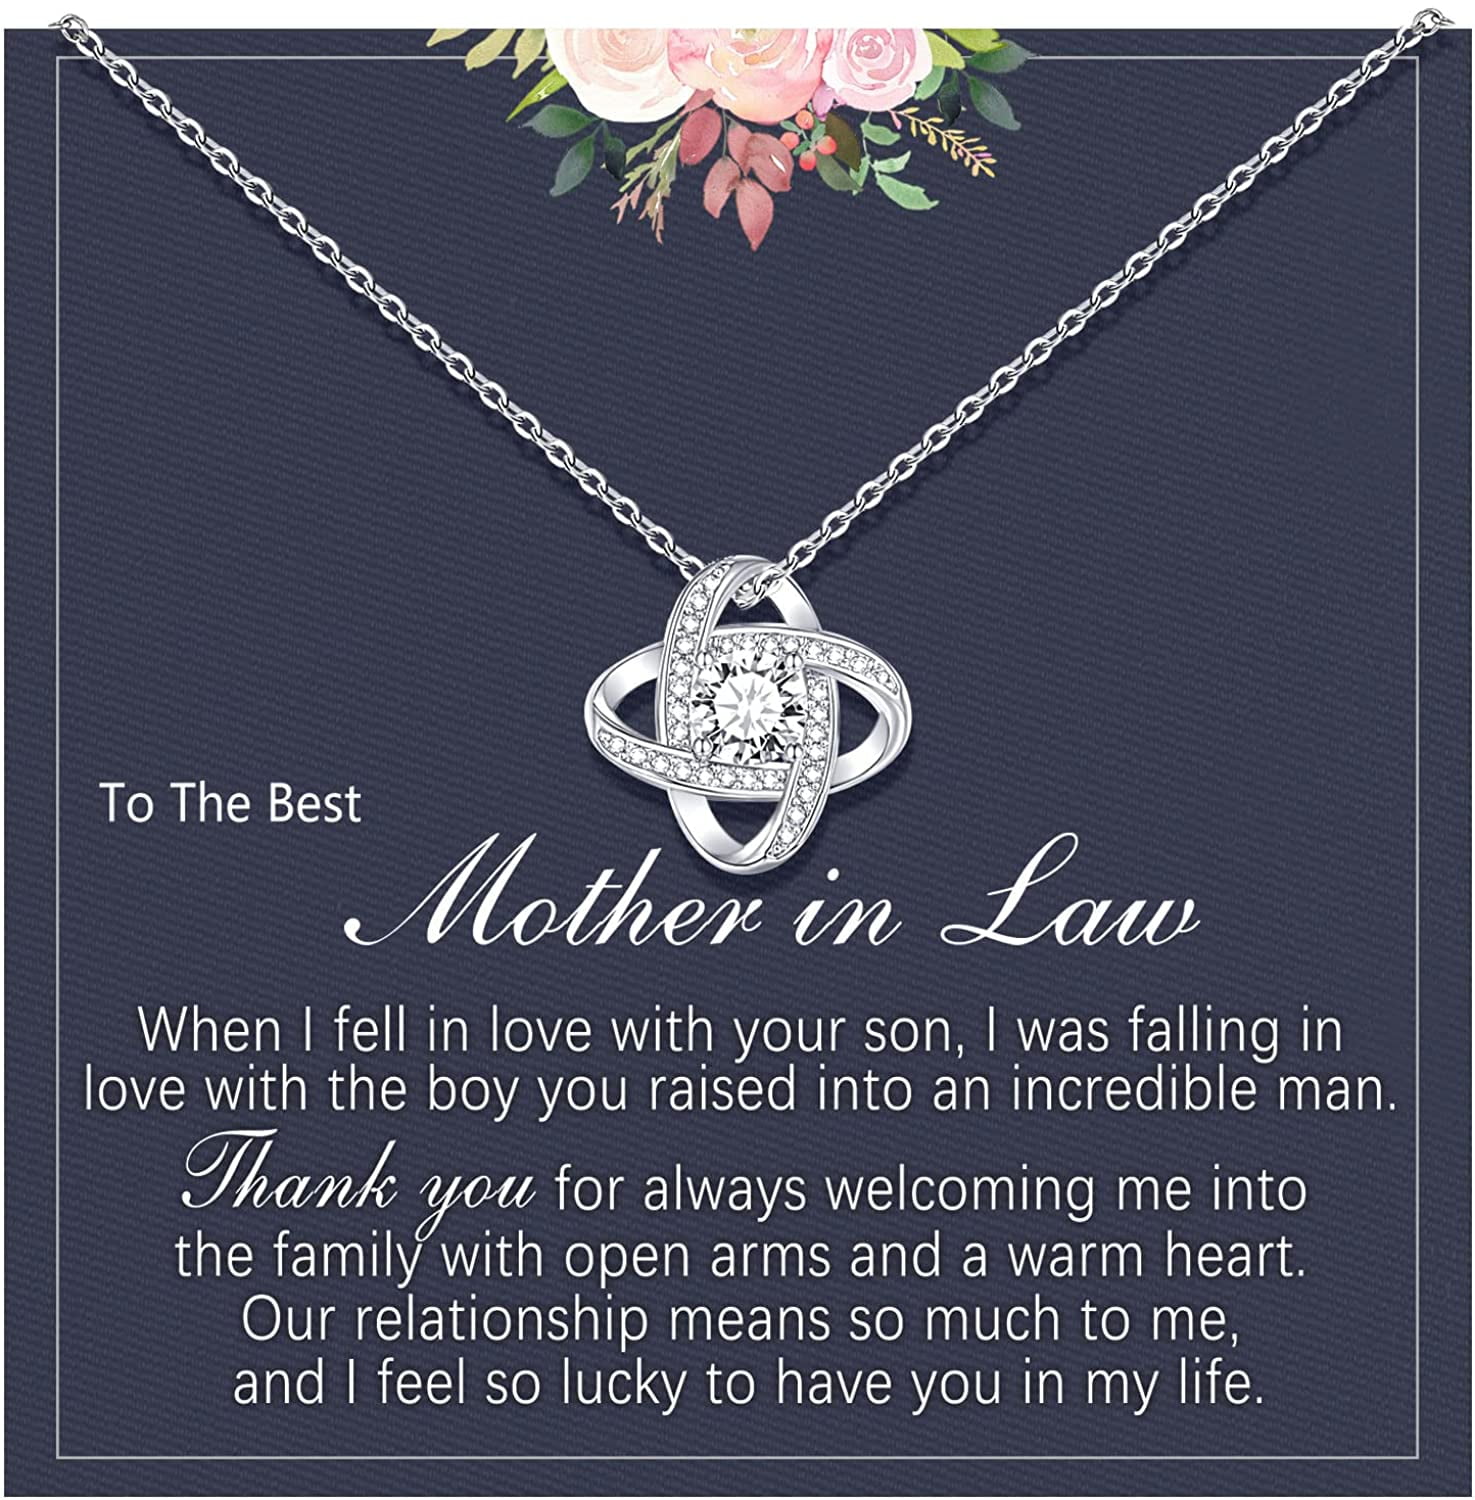 Personalized meaningful message Necklace Jewelry Gift to My Mother-in-law from daughter in law Mother in Law Gift Gifts for bonus mother